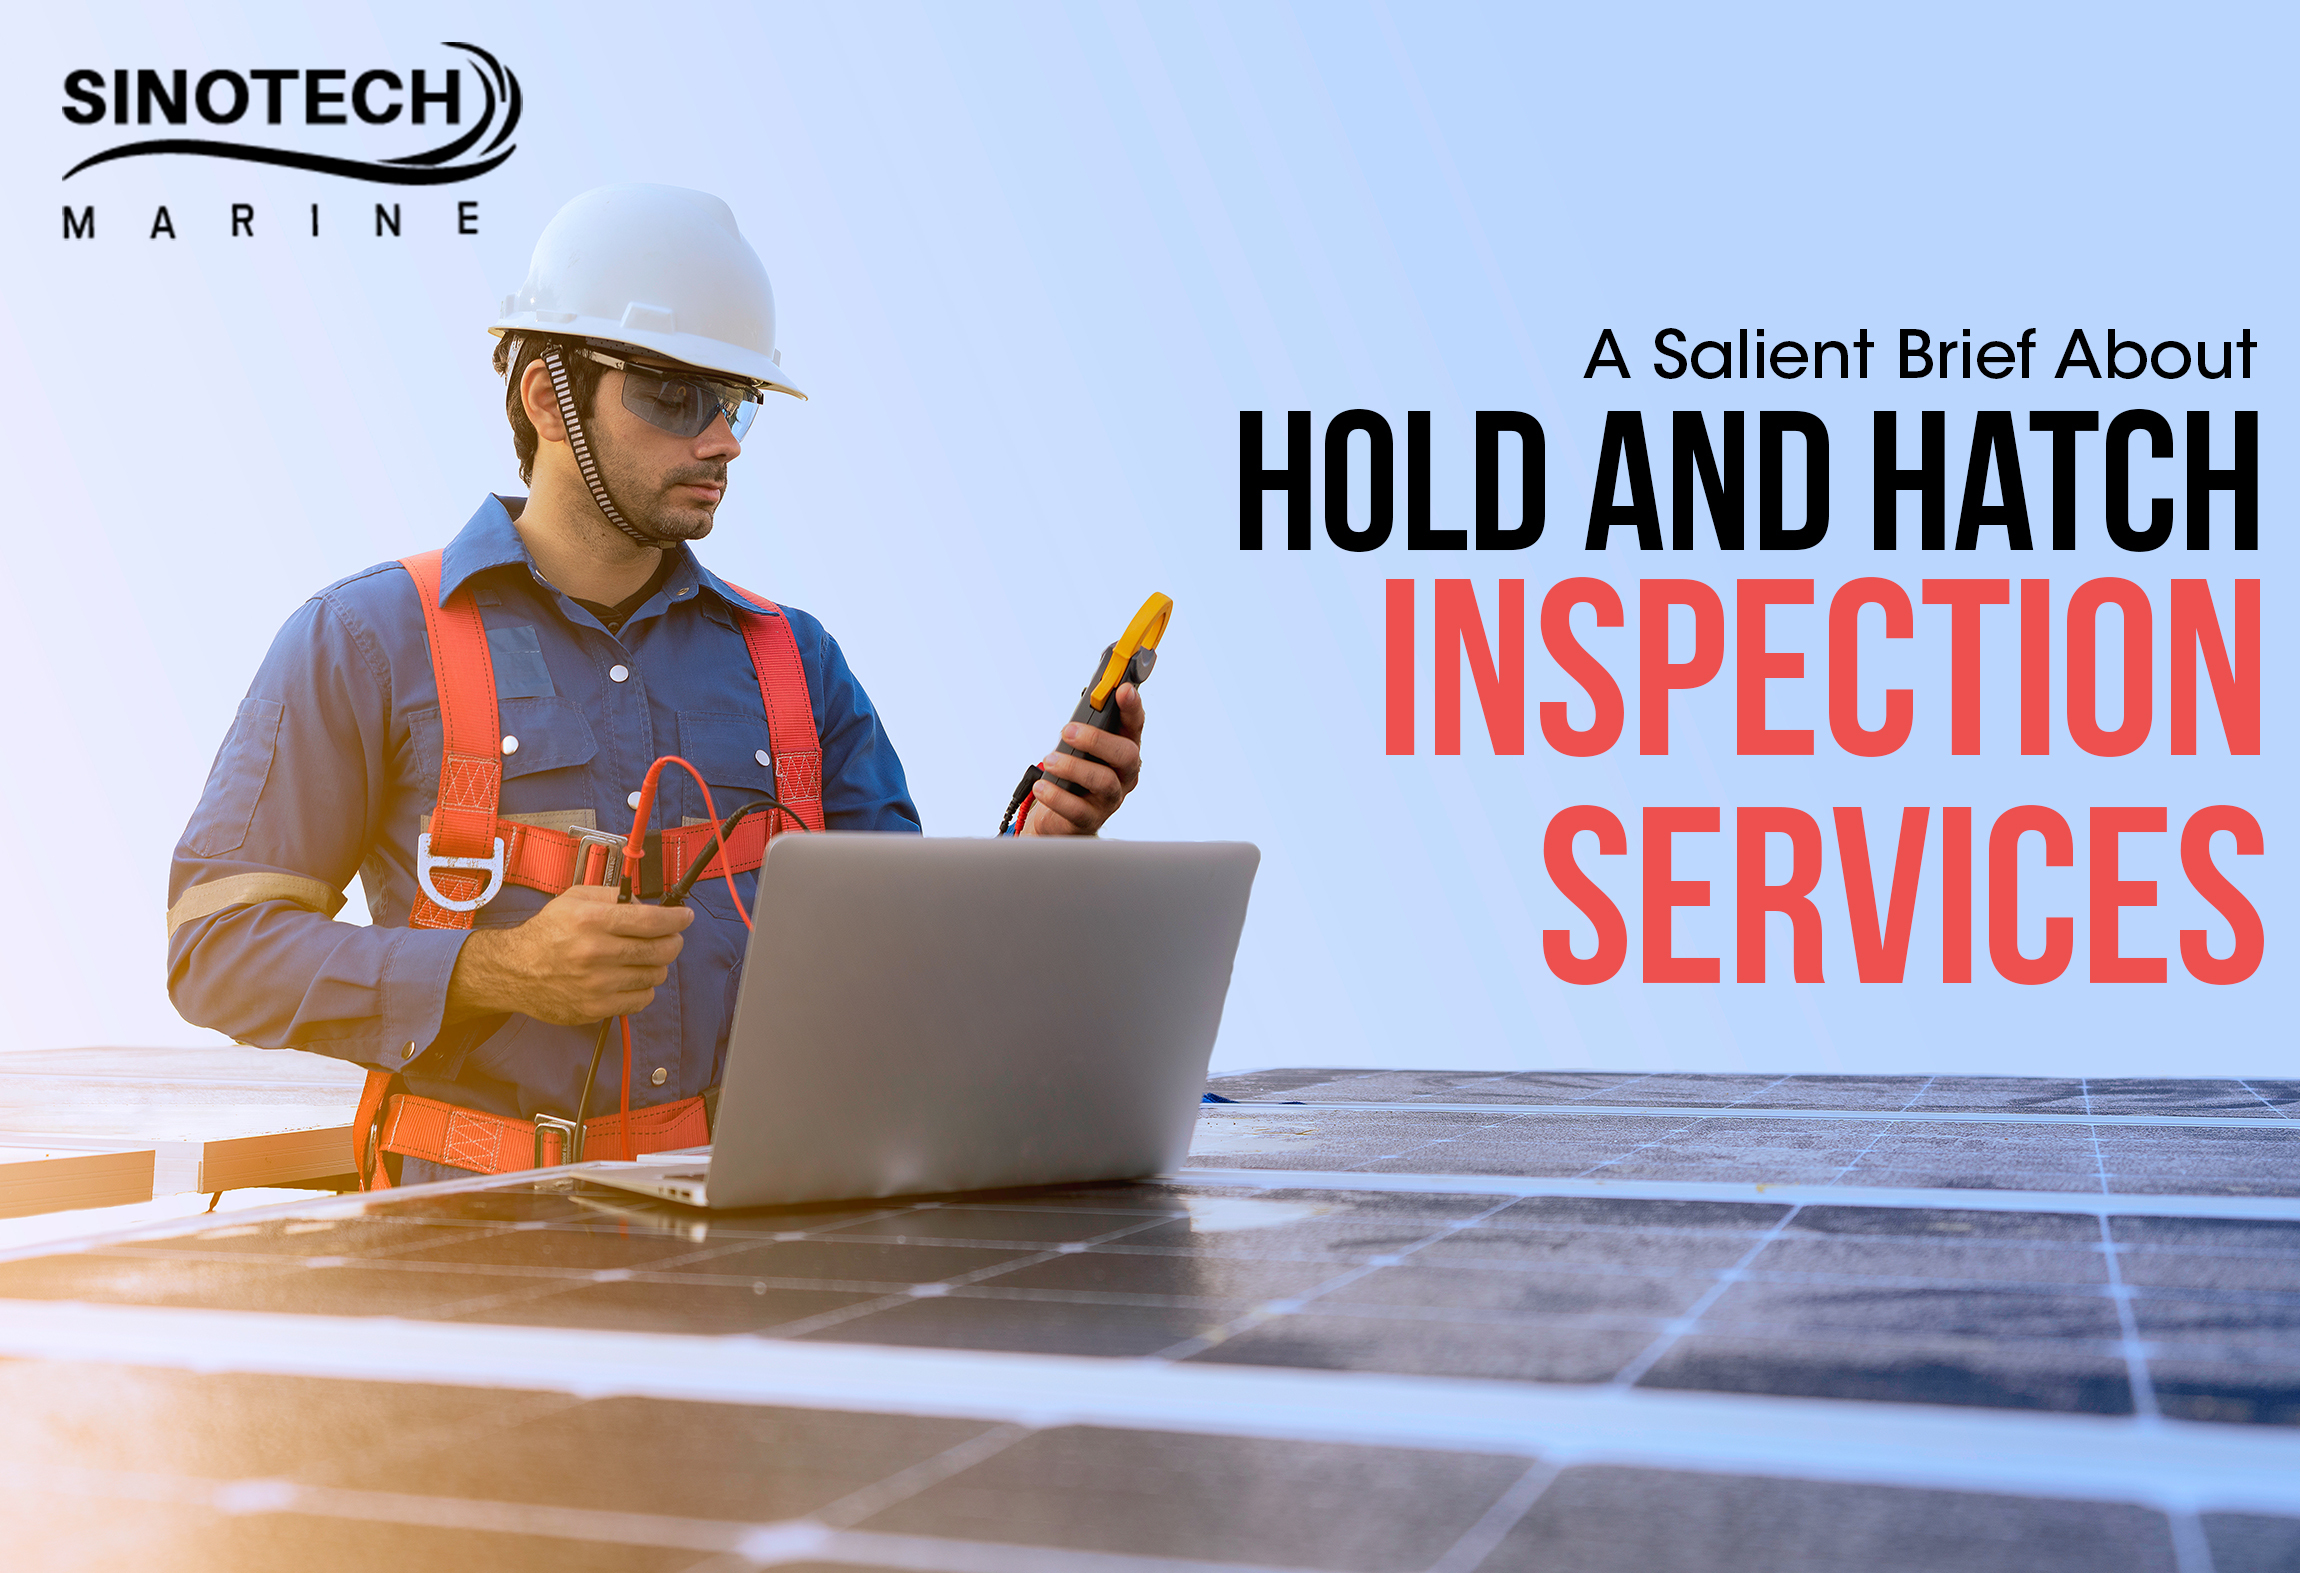 A Salient Brief About Hold and Hatch Inspection Services